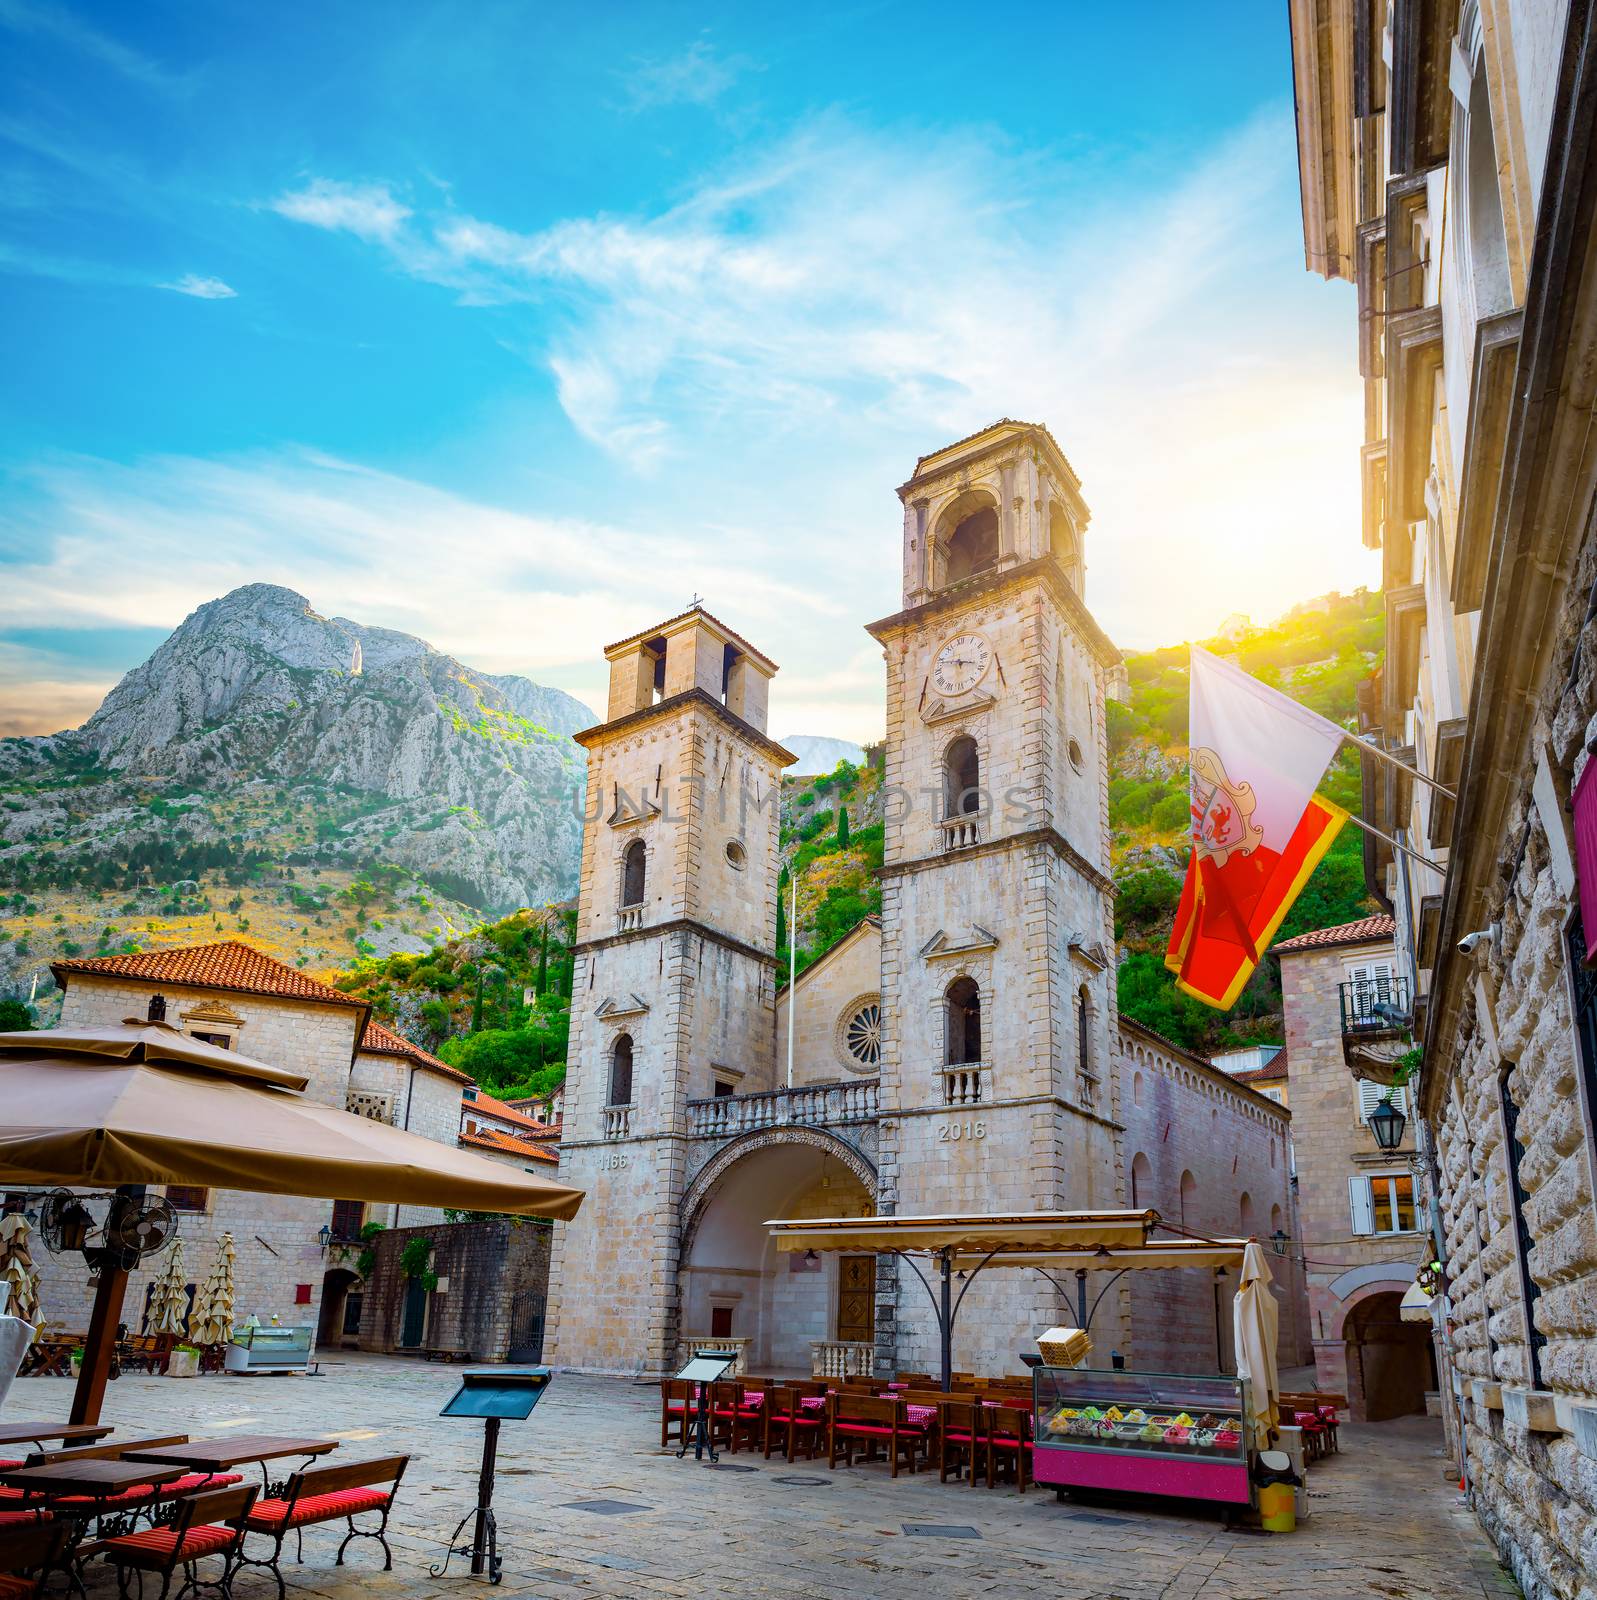 Church of Saint Tryphon in the old town of Kotor. Montenegro